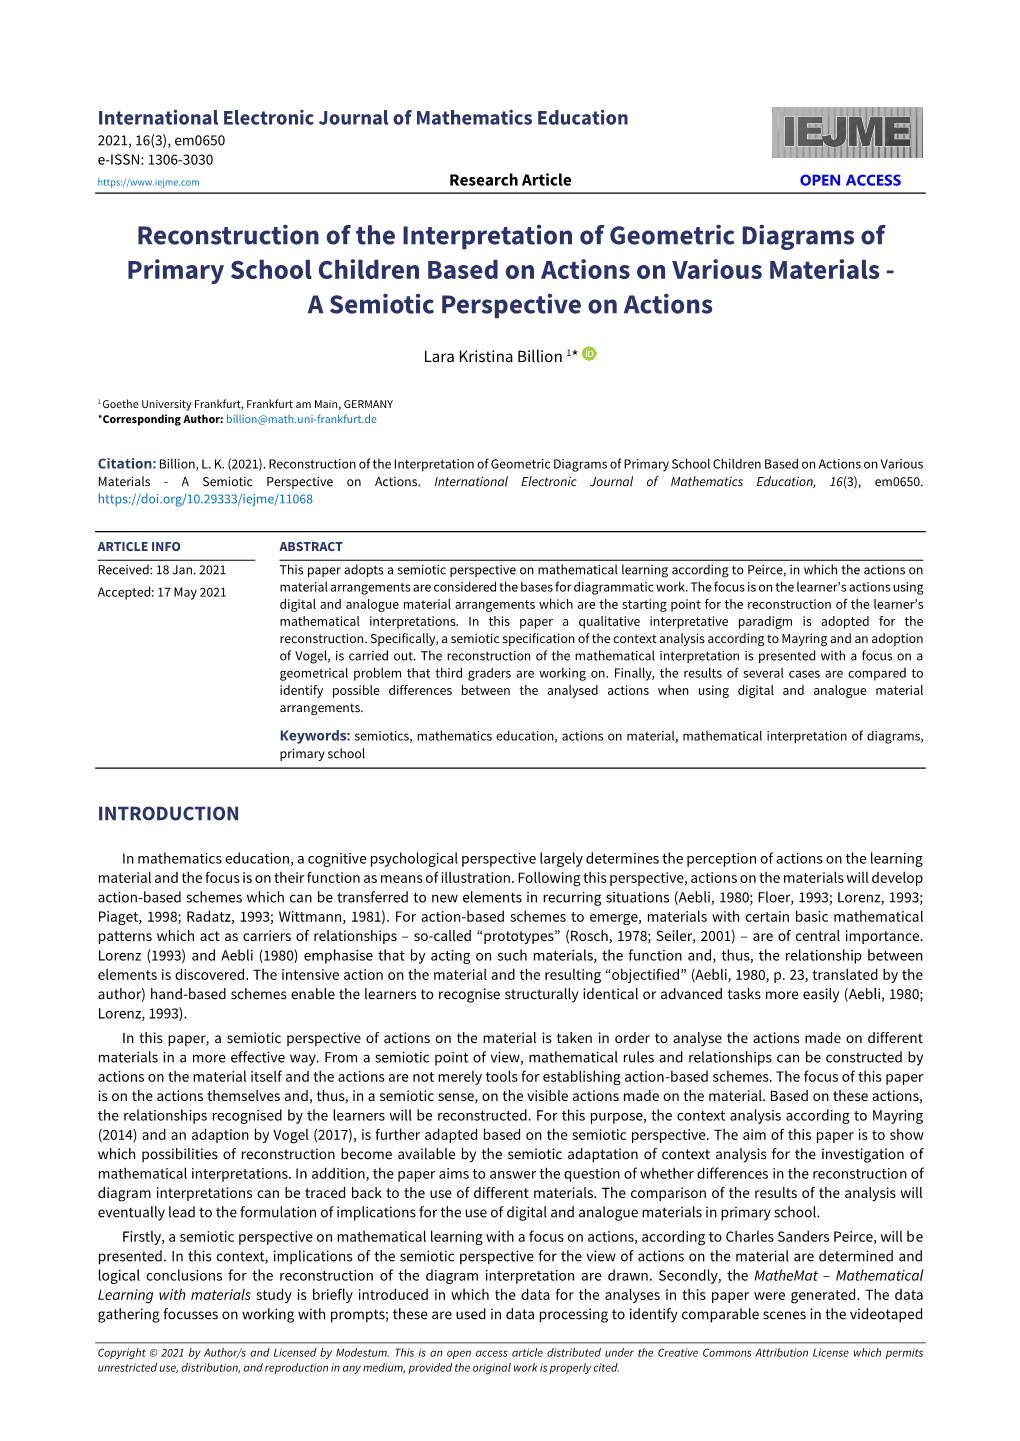 Reconstruction of the Interpretation of Geometric Diagrams of Primary School Children Based on Actions on Various Materials - a Semiotic Perspective on Actions